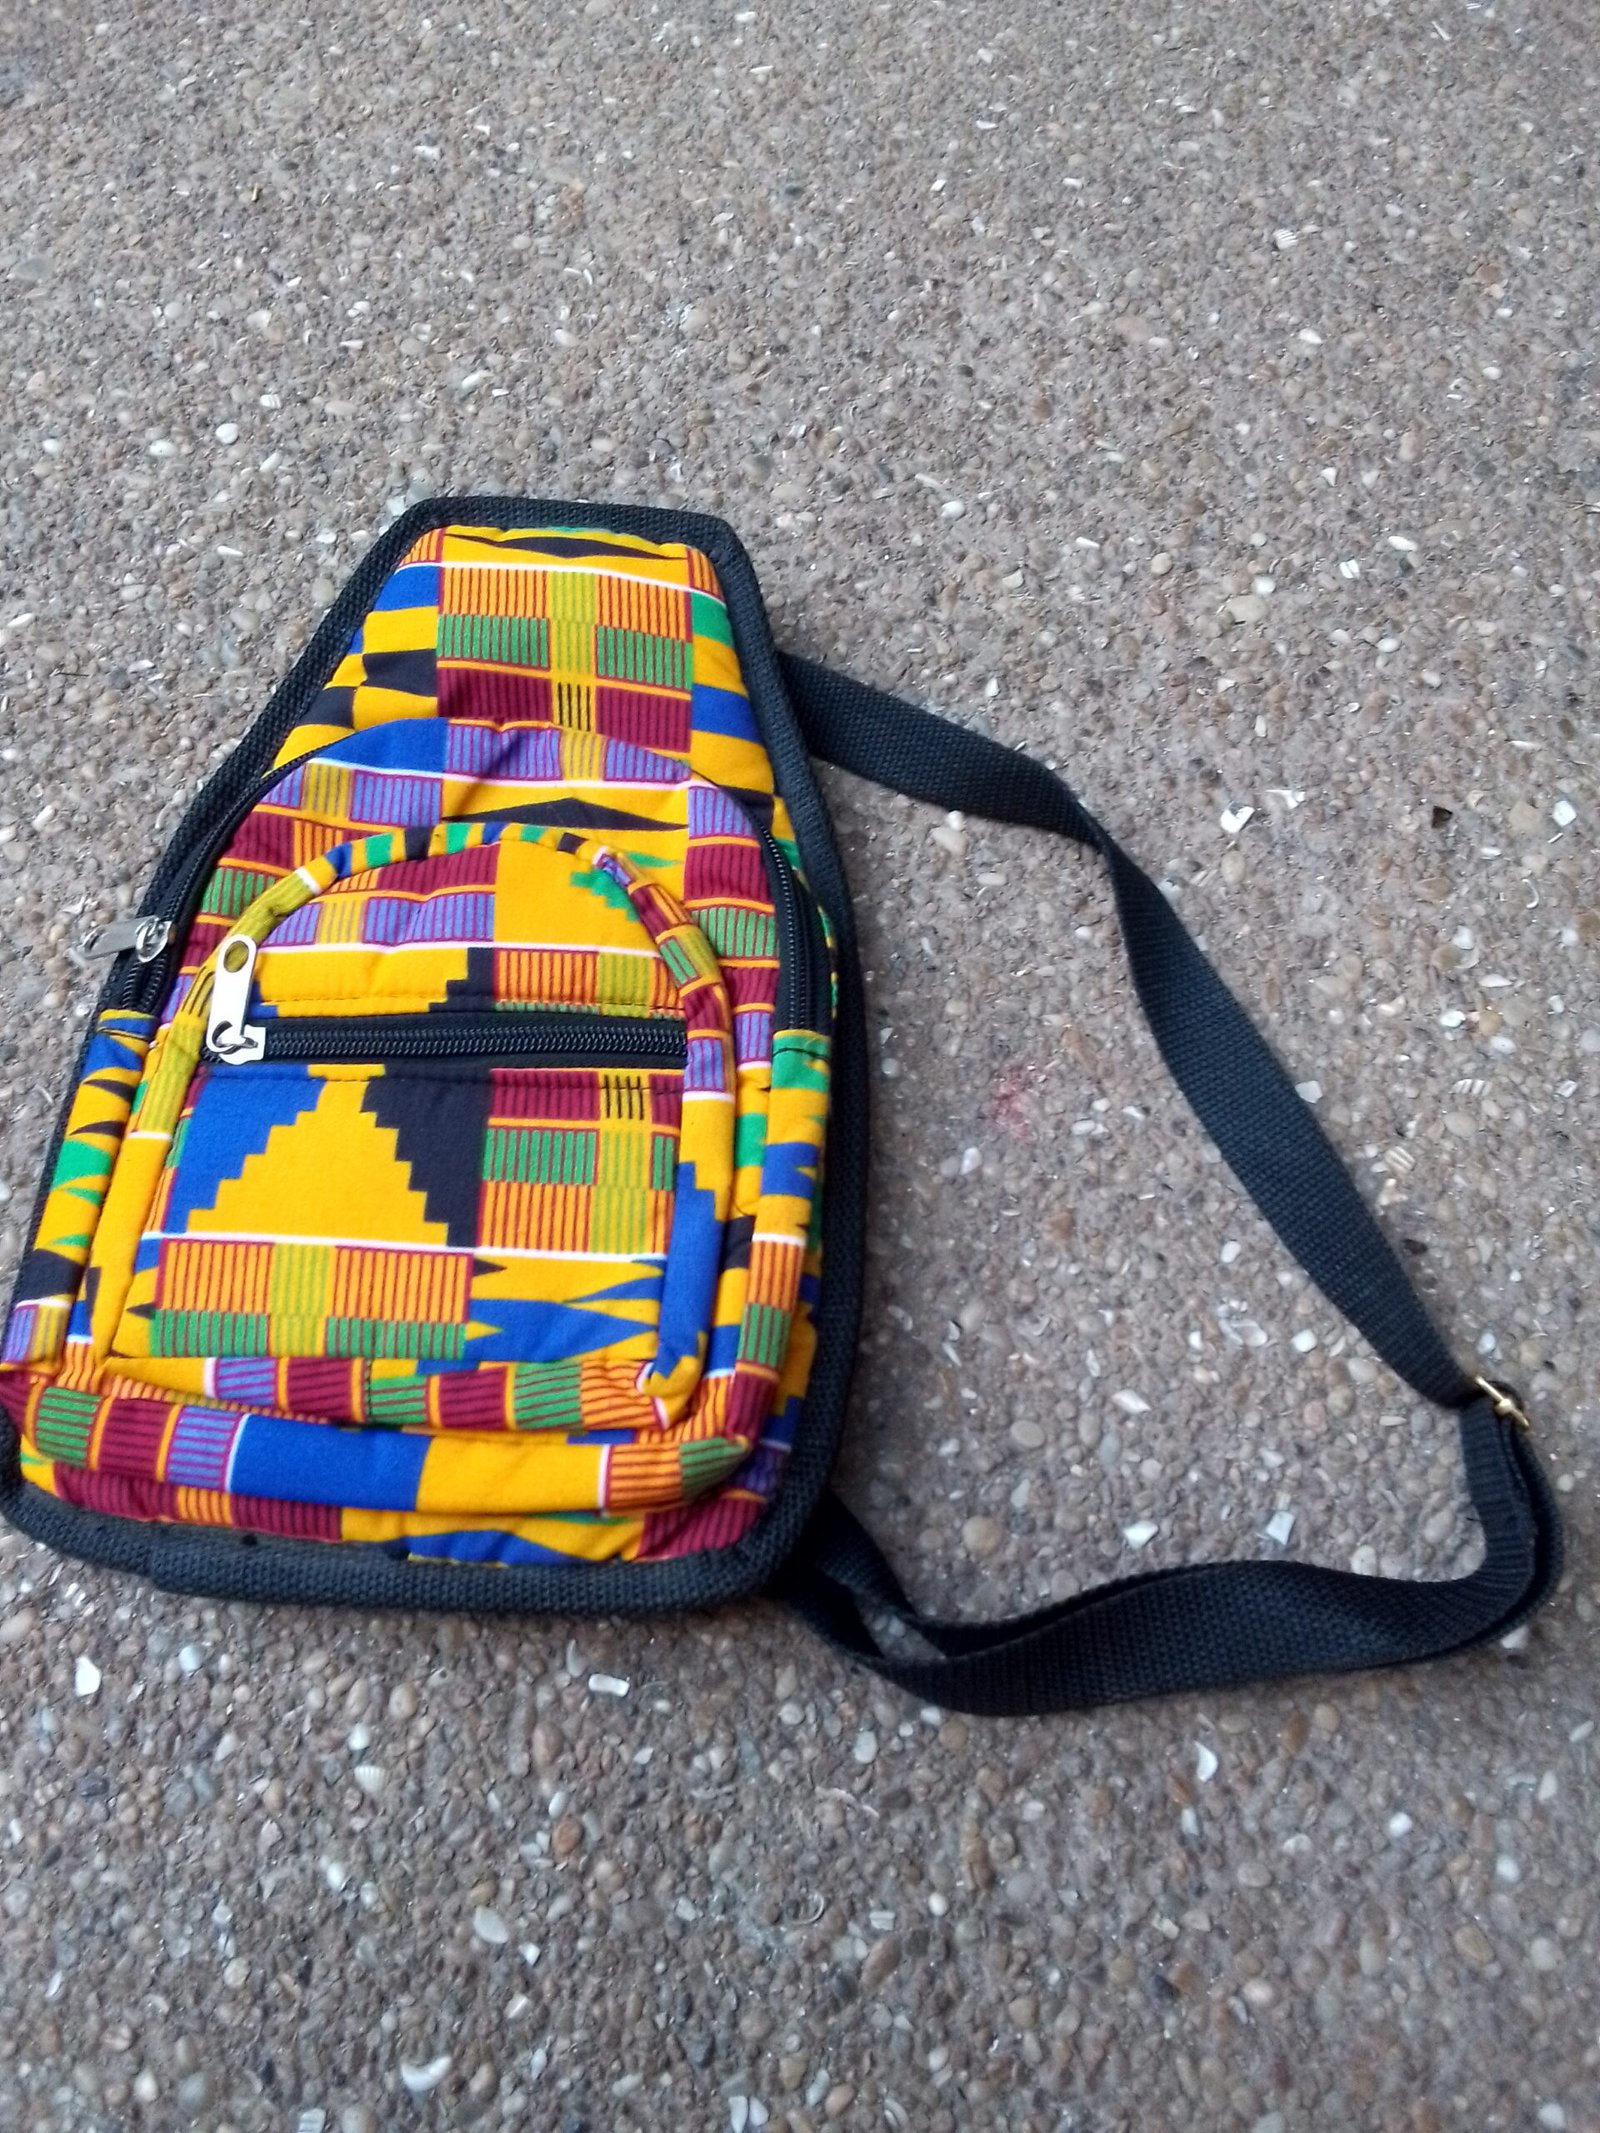 African Kente Elegance Bag: The Quintessential Bag for Every Occasion